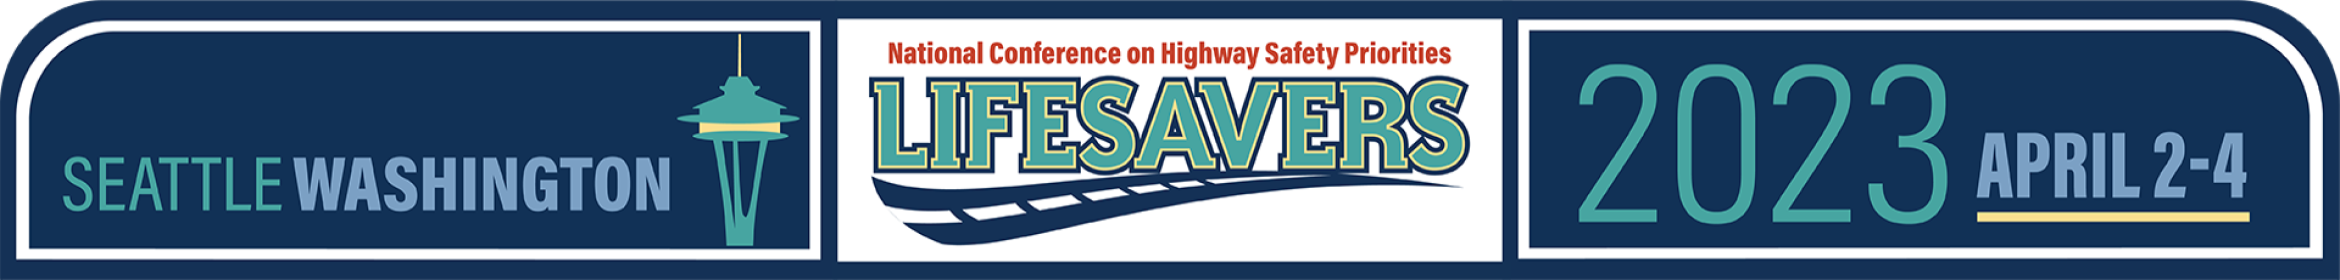 Lifesavers Conference Banner detail image